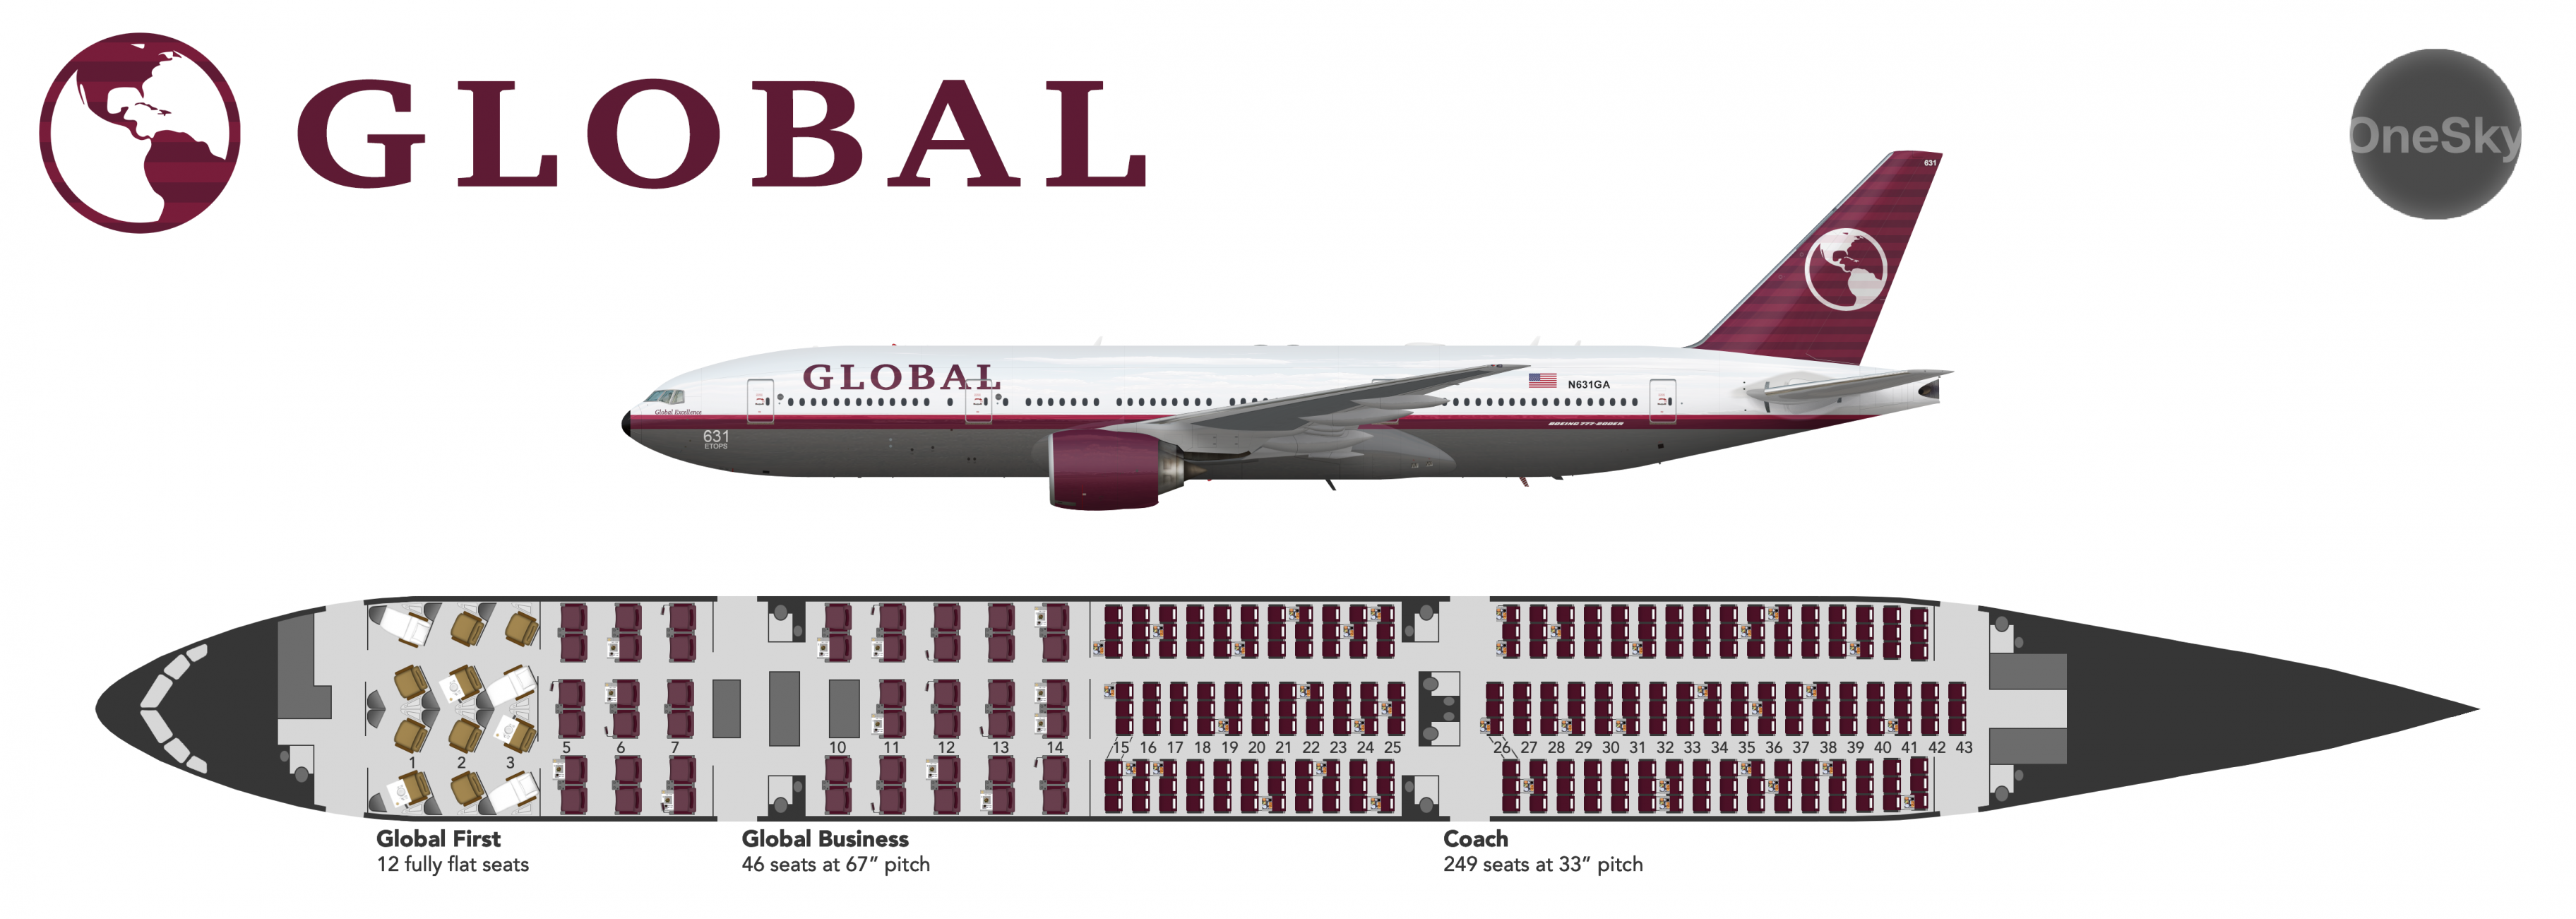 Boeing 777-200ER | 1997 - Global Group - Gallery - Airline Empires